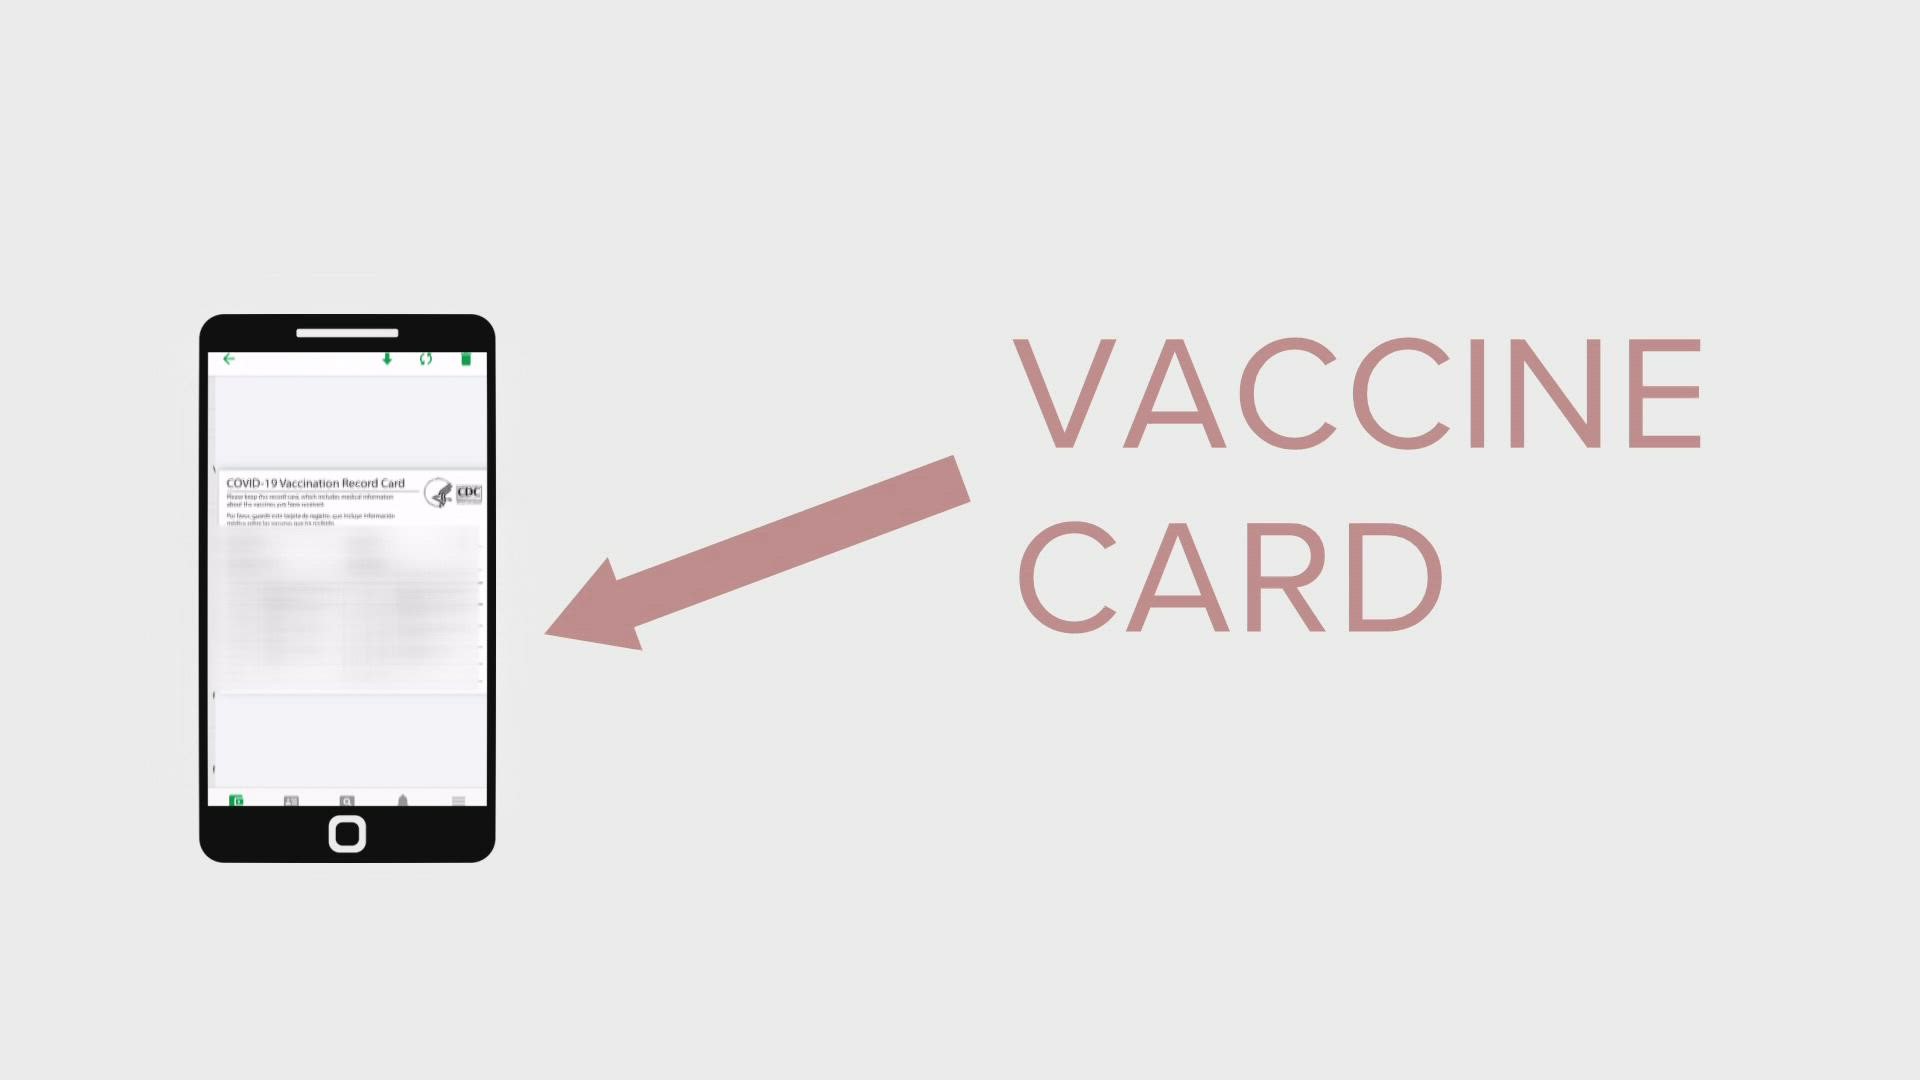 Russell Castagnaro, the state's director of digital transformation, talks us through bugs with the MyColorado app, as people use it to access COVID vaccine cards.